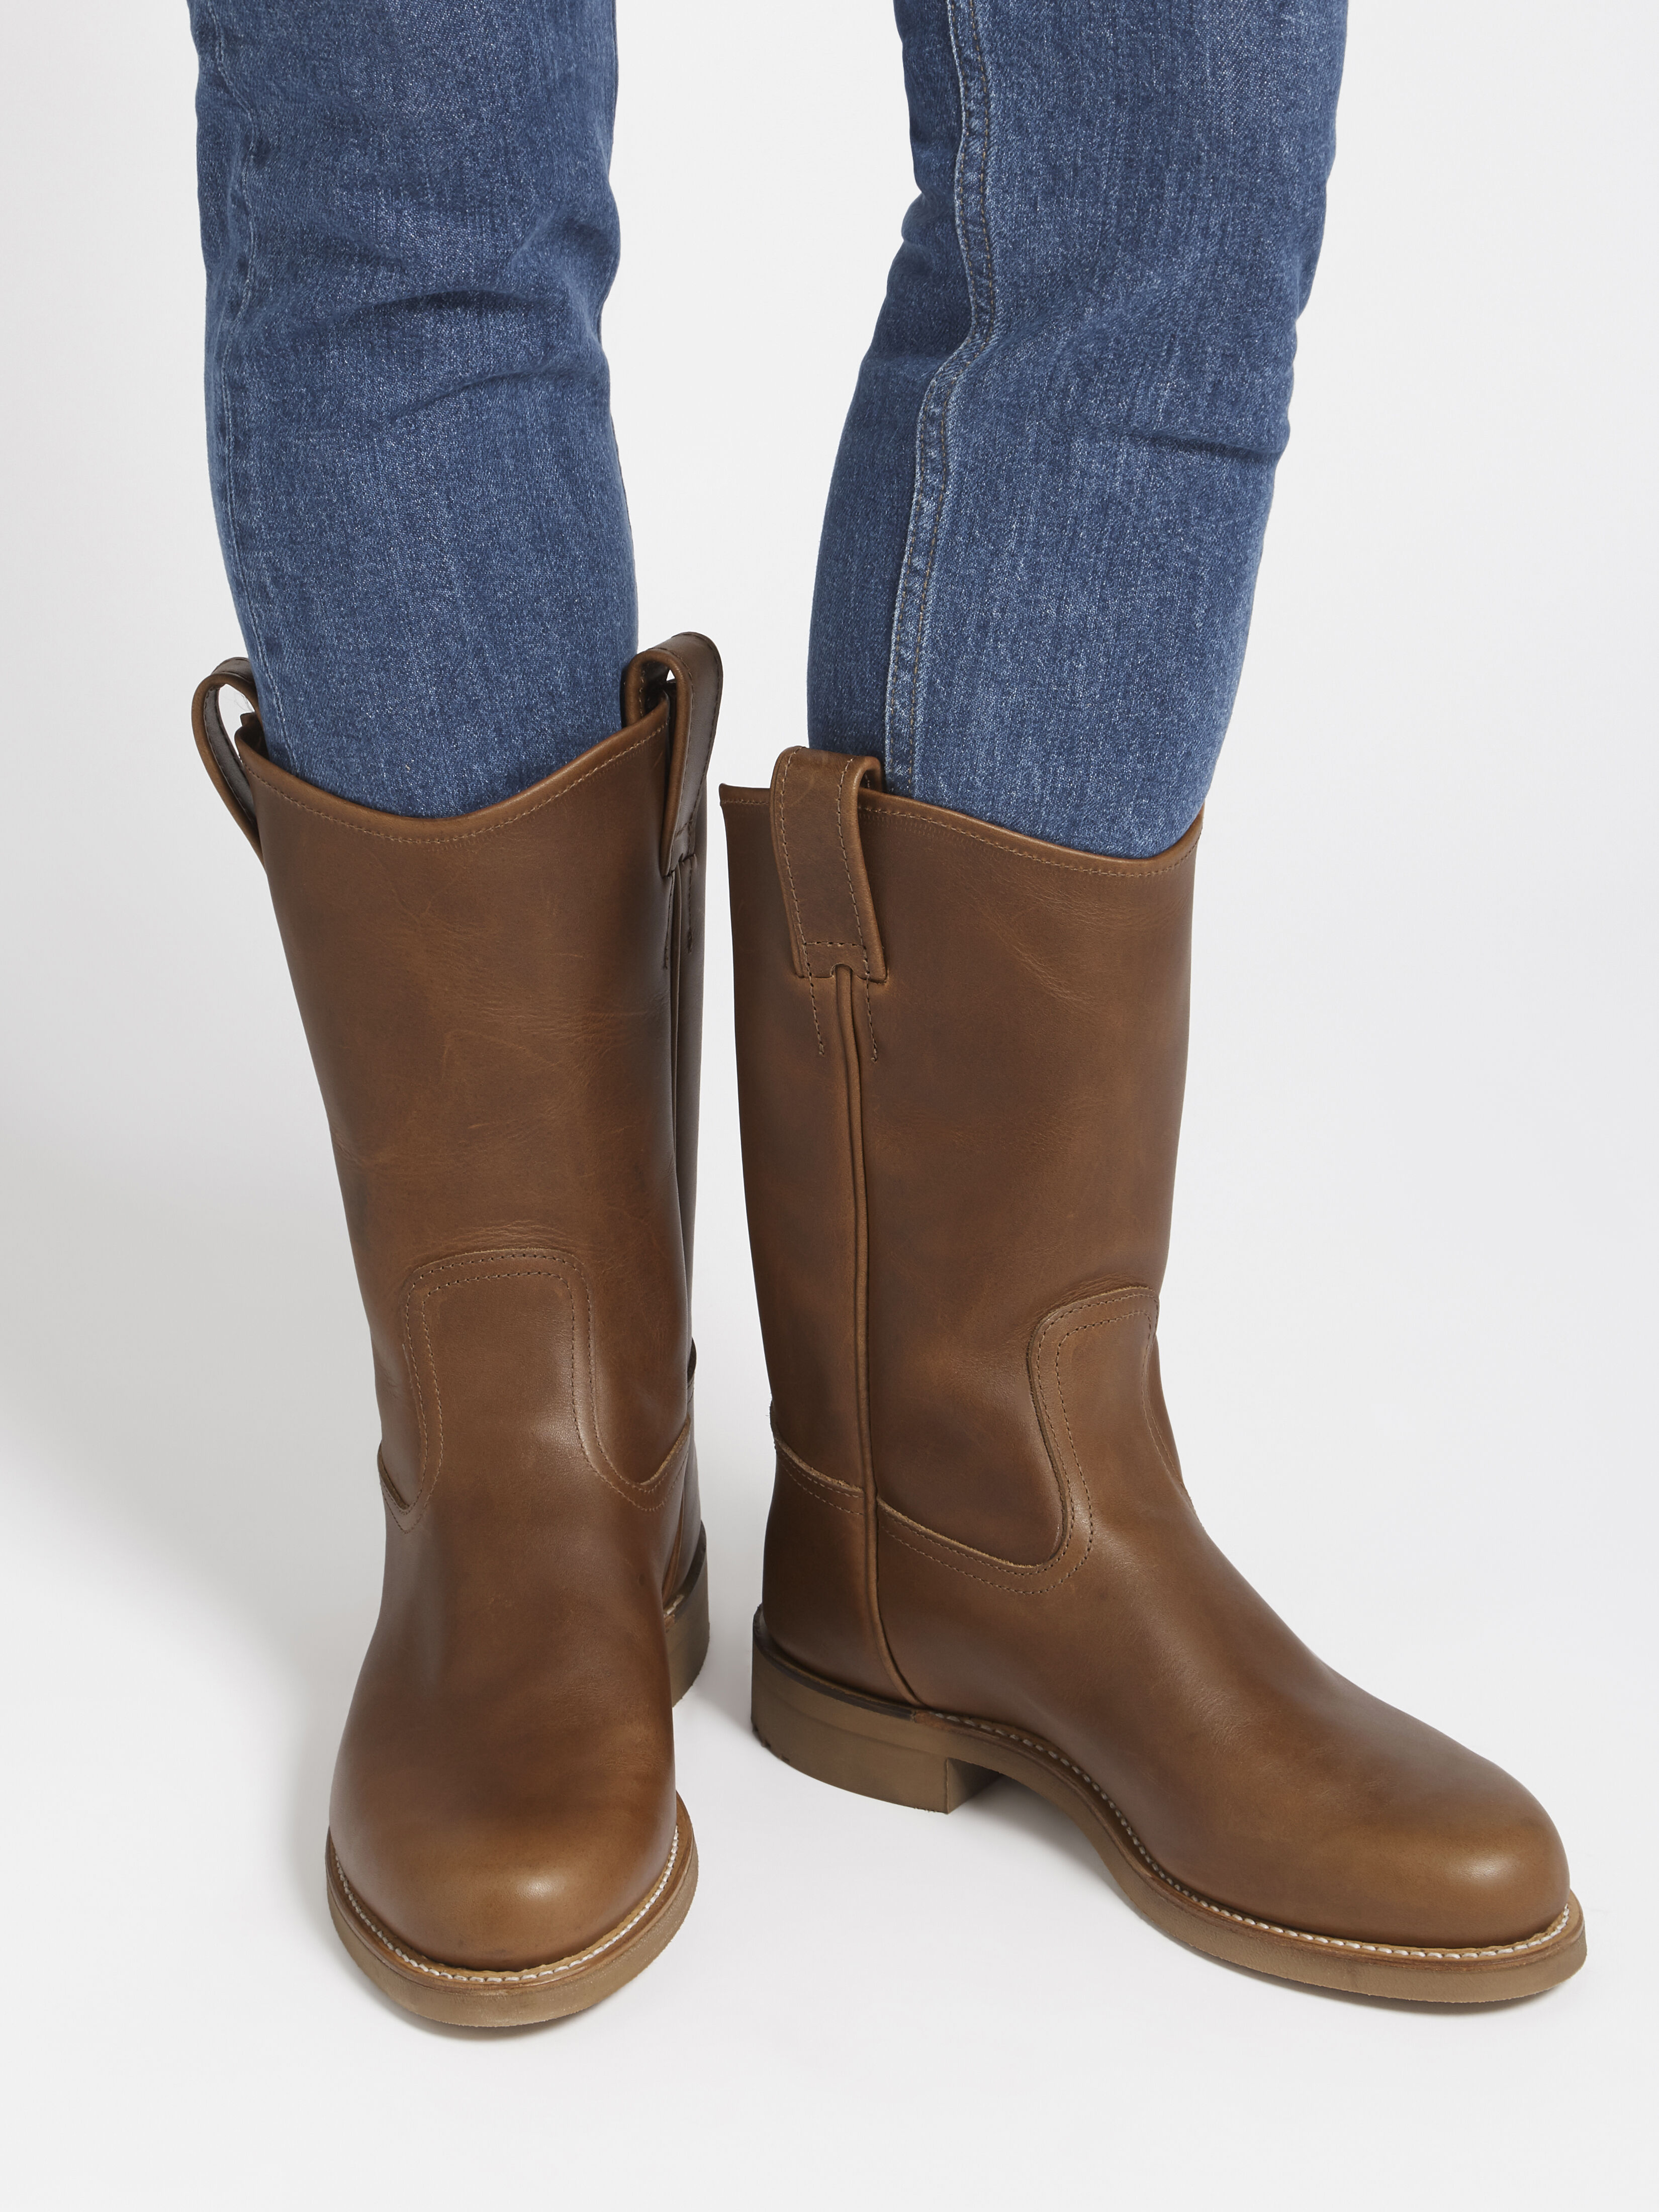 rm williams riding boots